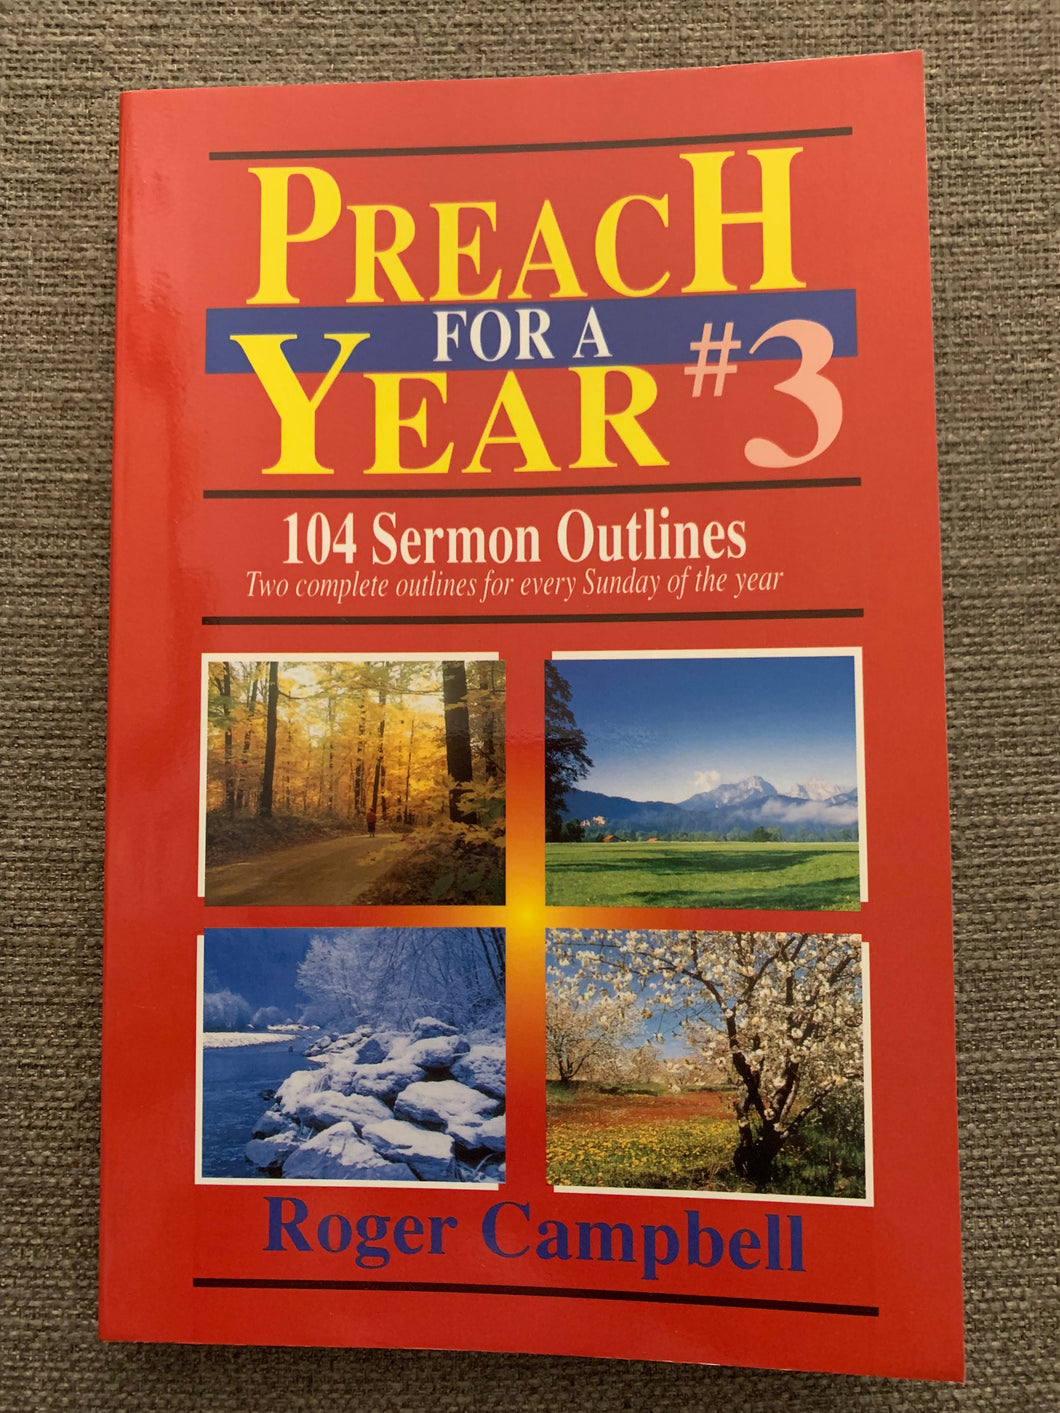 Preach for a Year #3: 104 Sermon Outlines by Roger Campbell